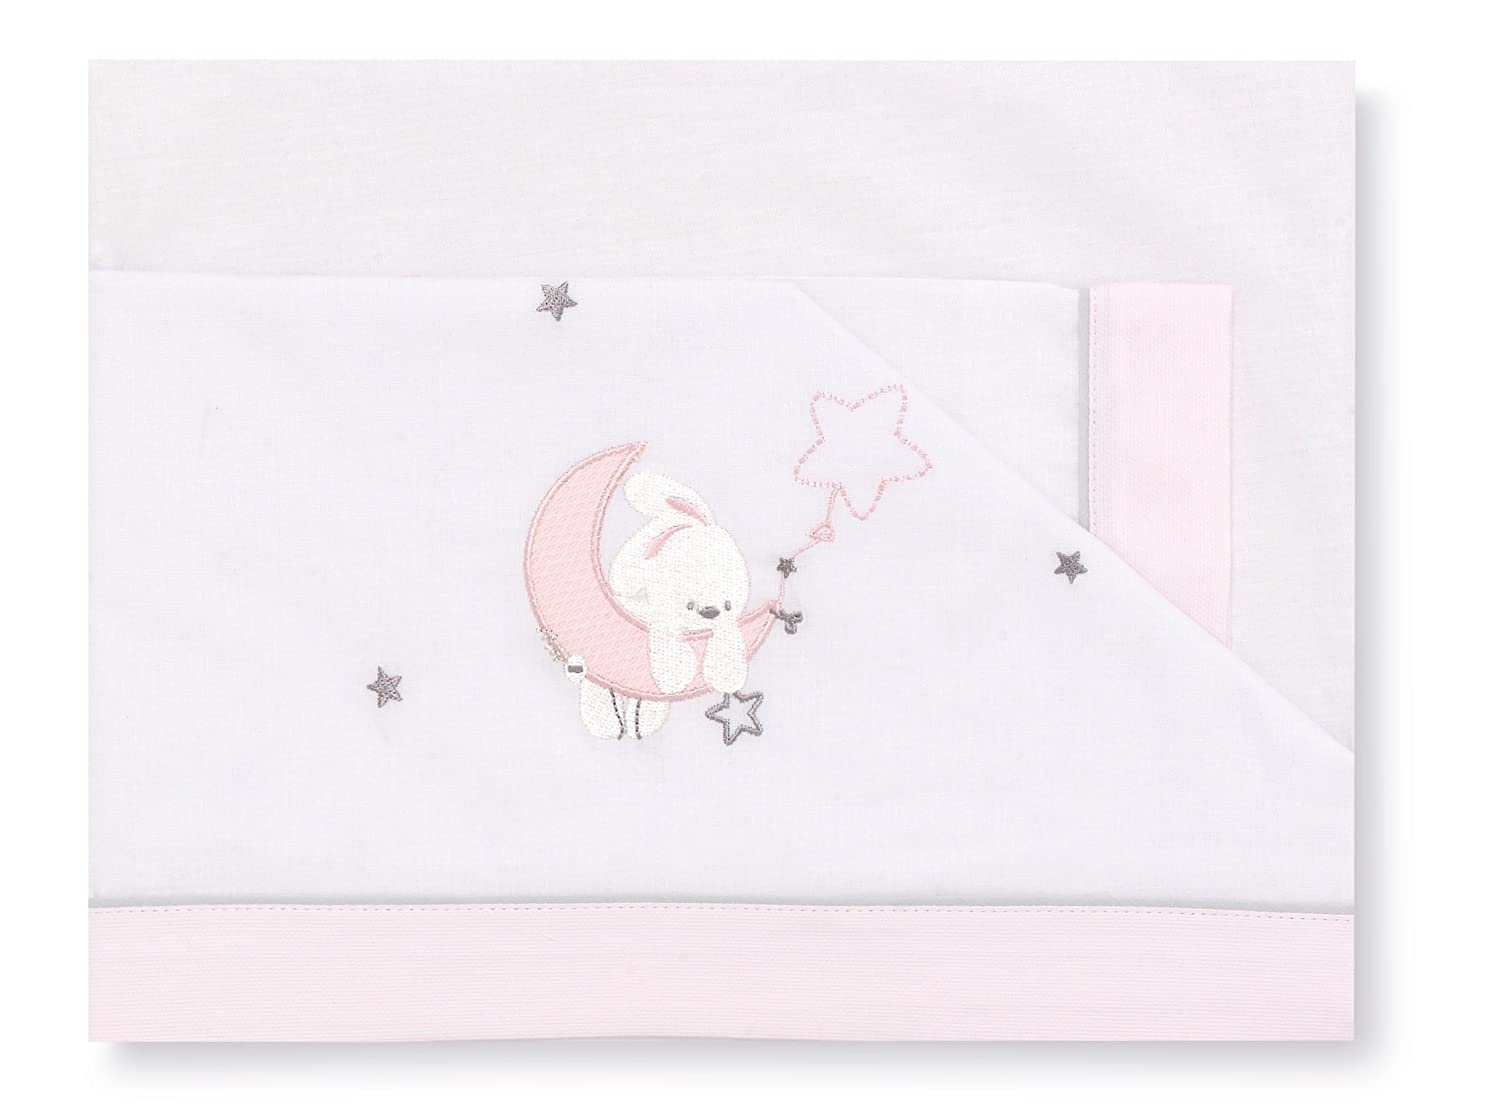 Pirulos 00113114 – Bedding – Moon, 50 X 80 Cm, White And Pink